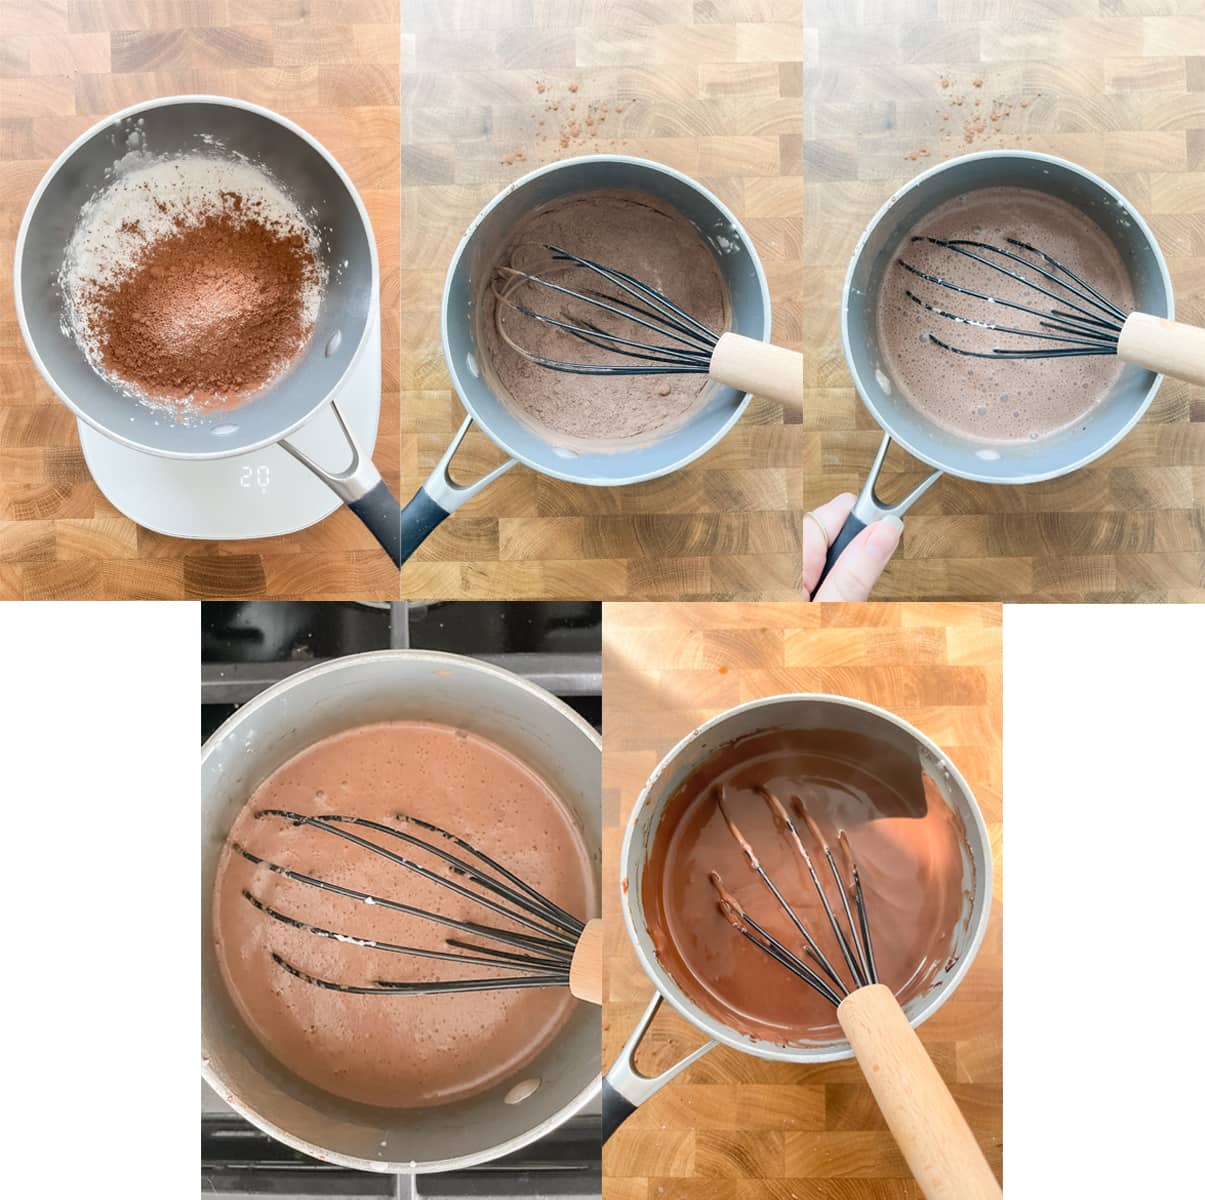 Chocolate pudding process images, from mixing to fully cooked. 